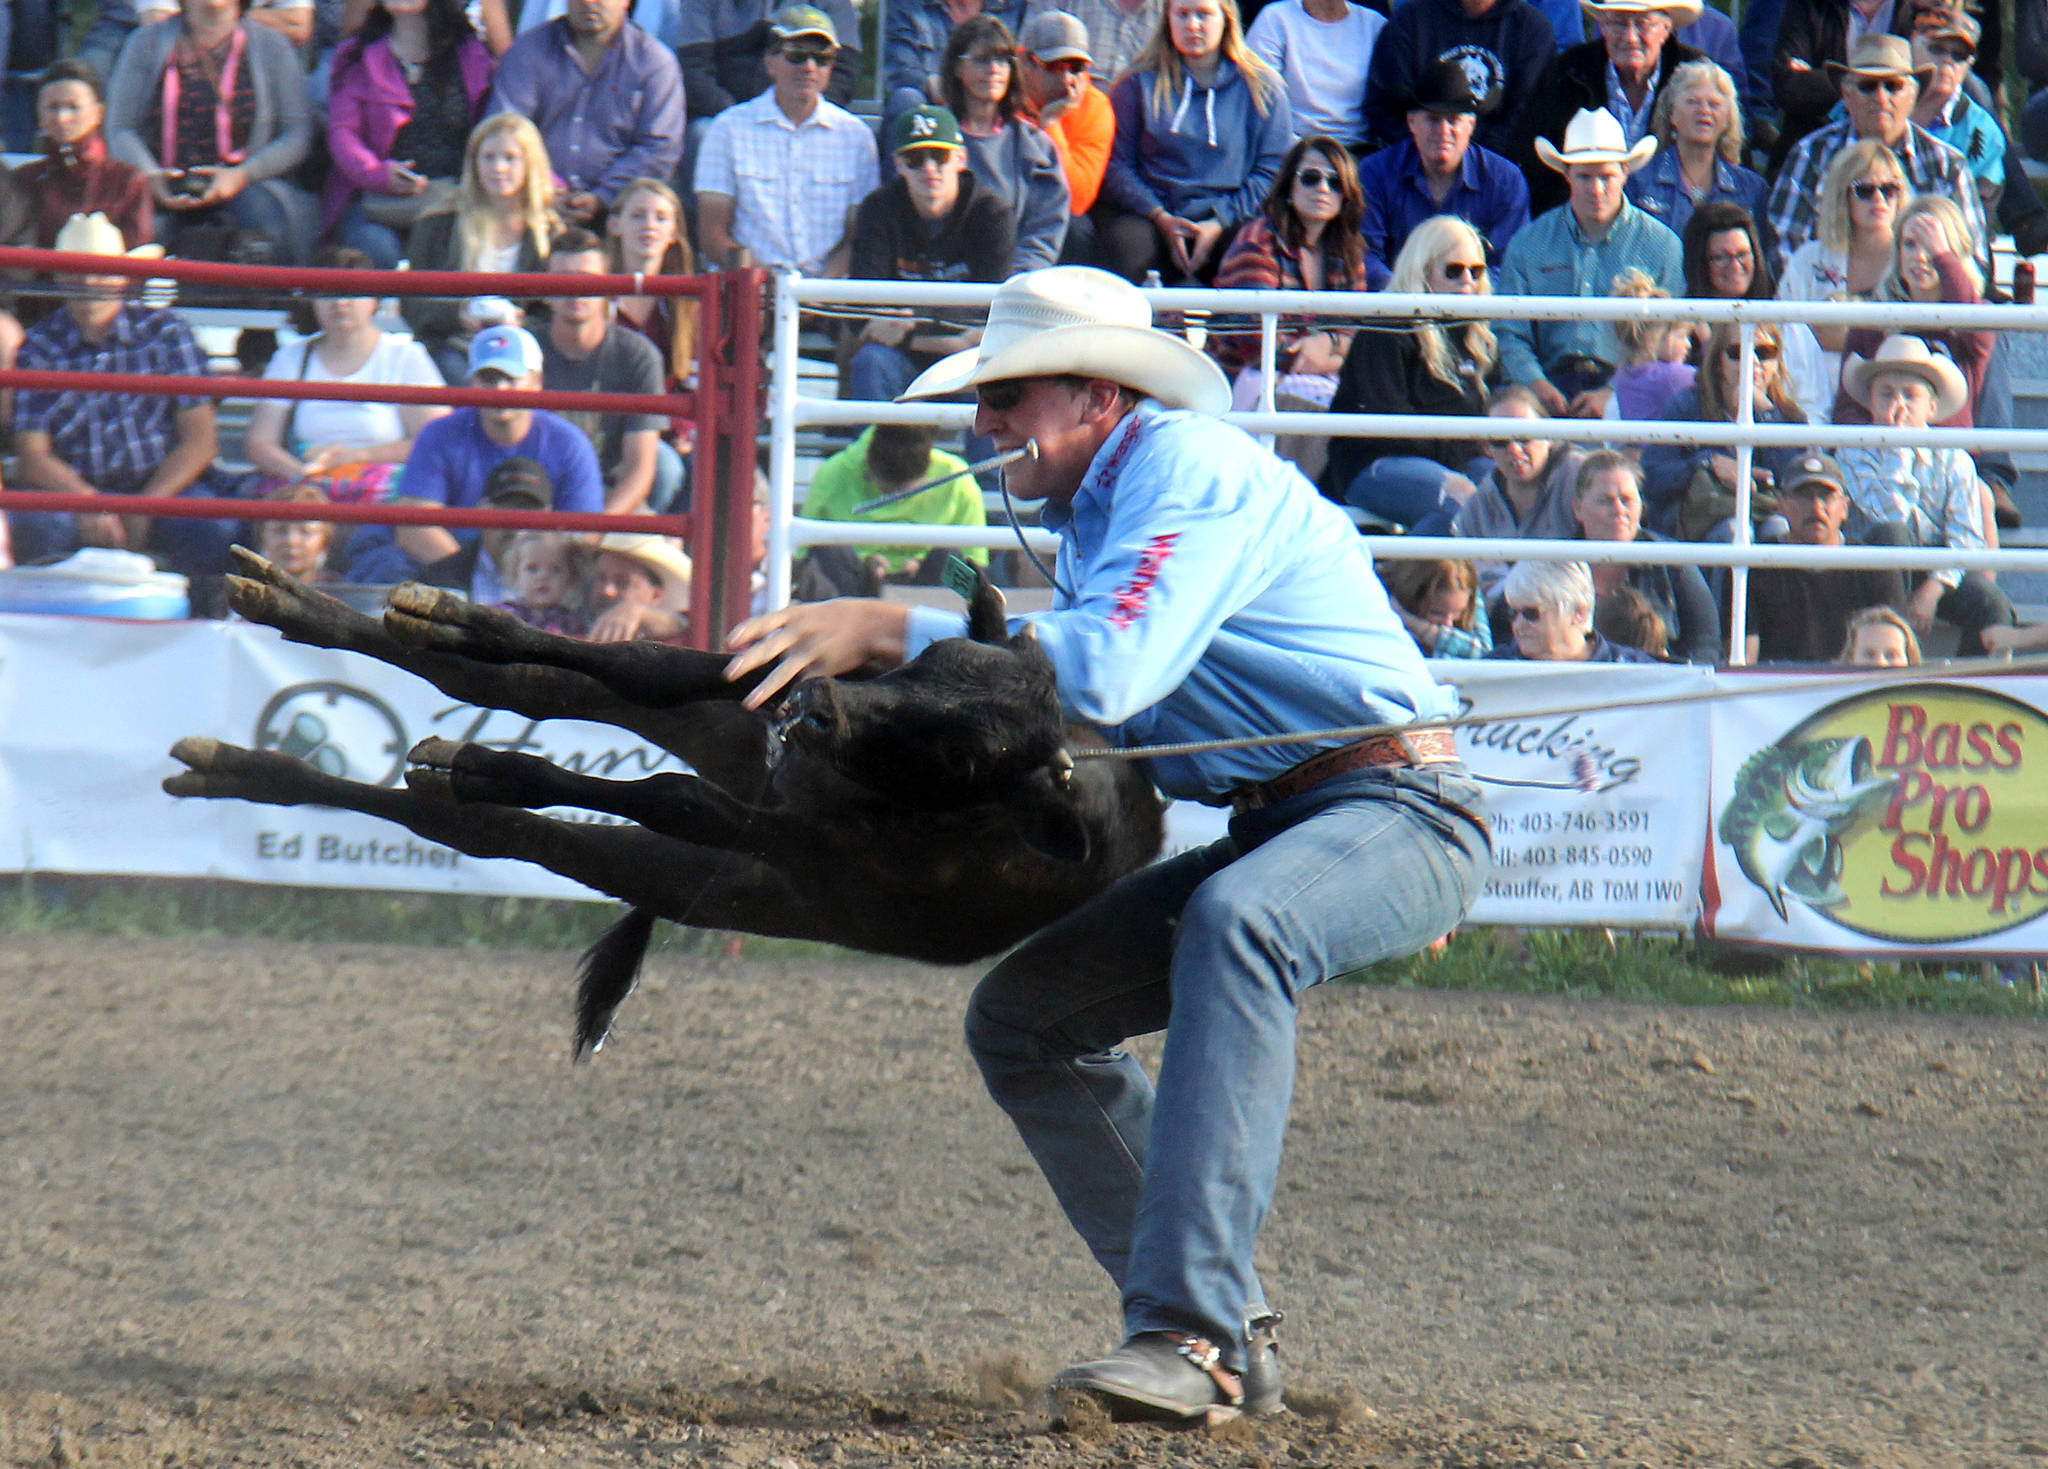 Colt Cornet flips a calf onto its back to complete the tie-down roping event. Cornet had one of the fastest times of the night, and put him on the leaderboard.